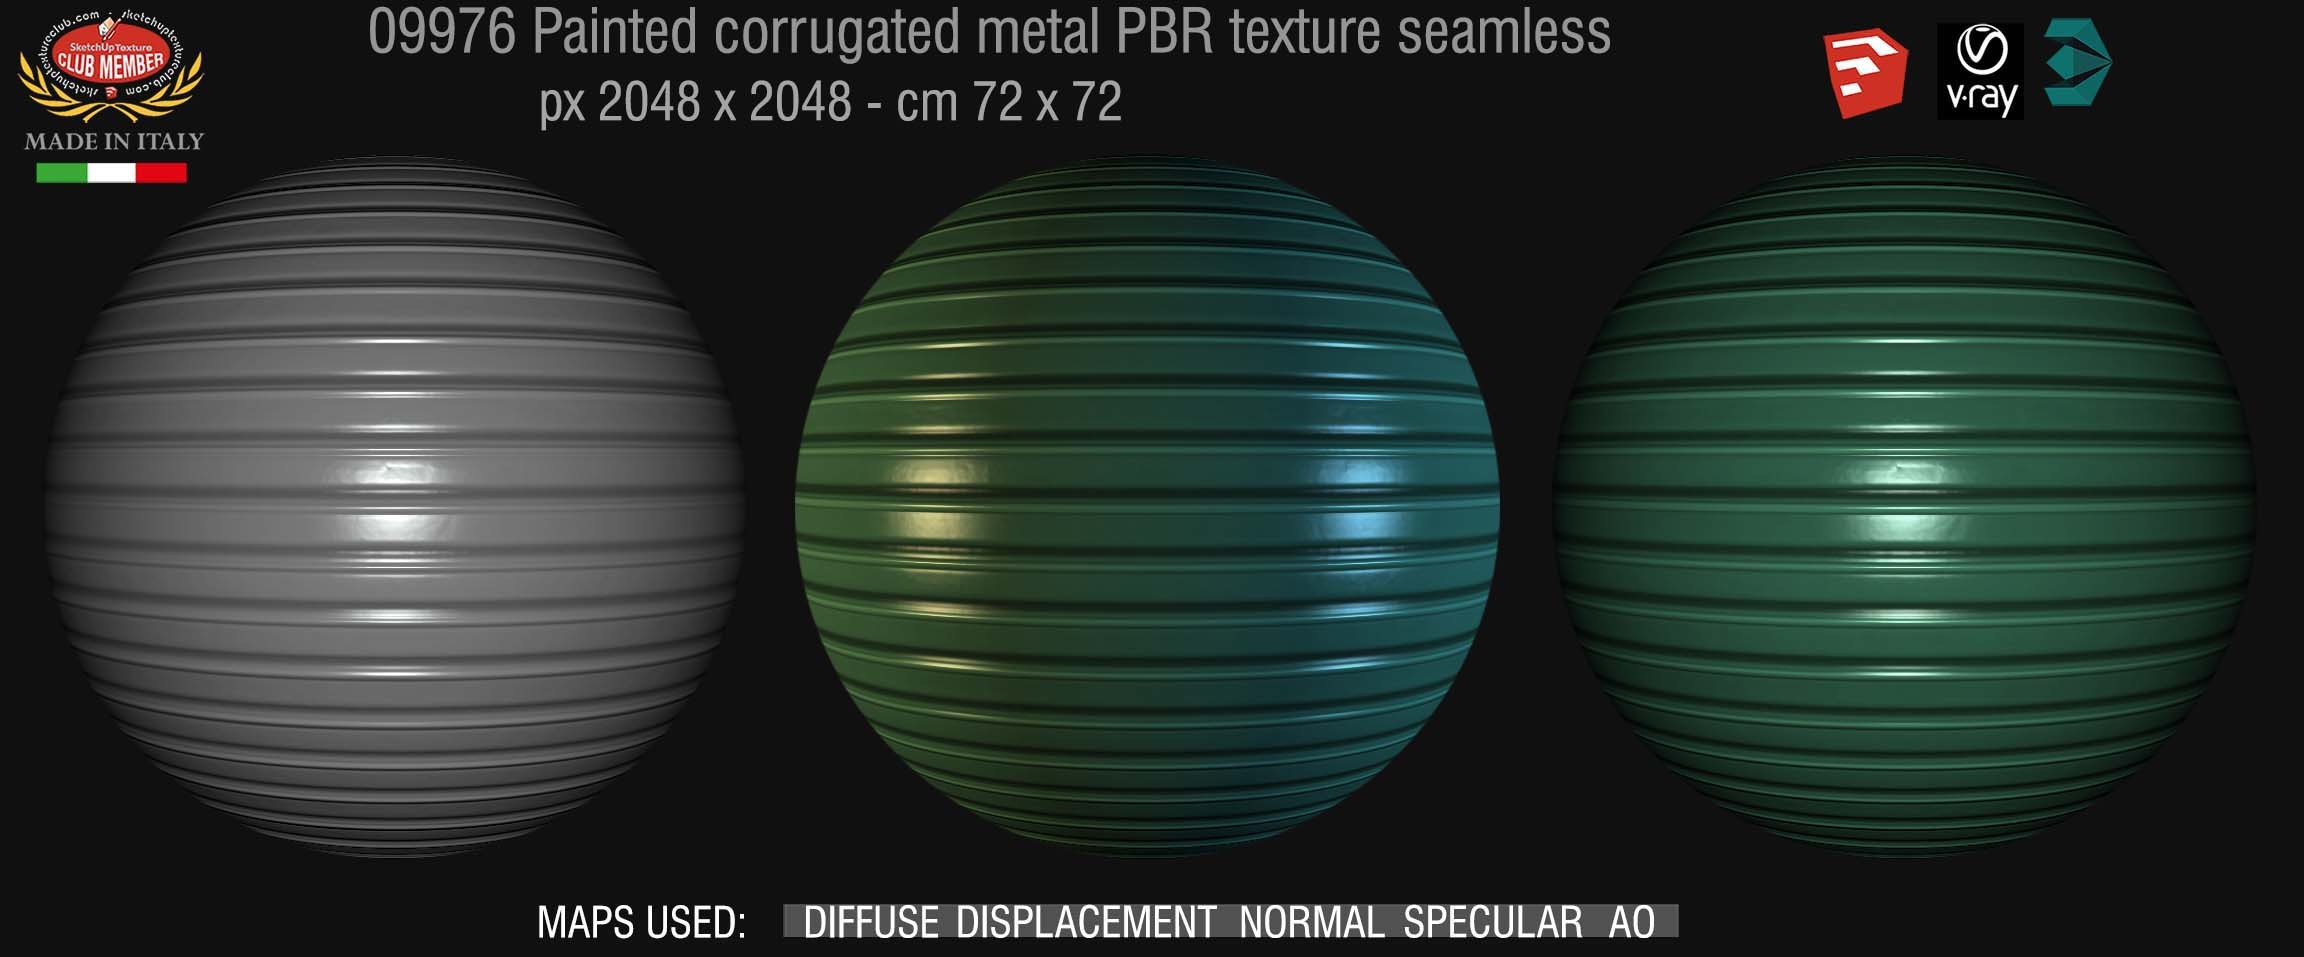 09976 Painted corrugated metal PBR texture seamless DEMO